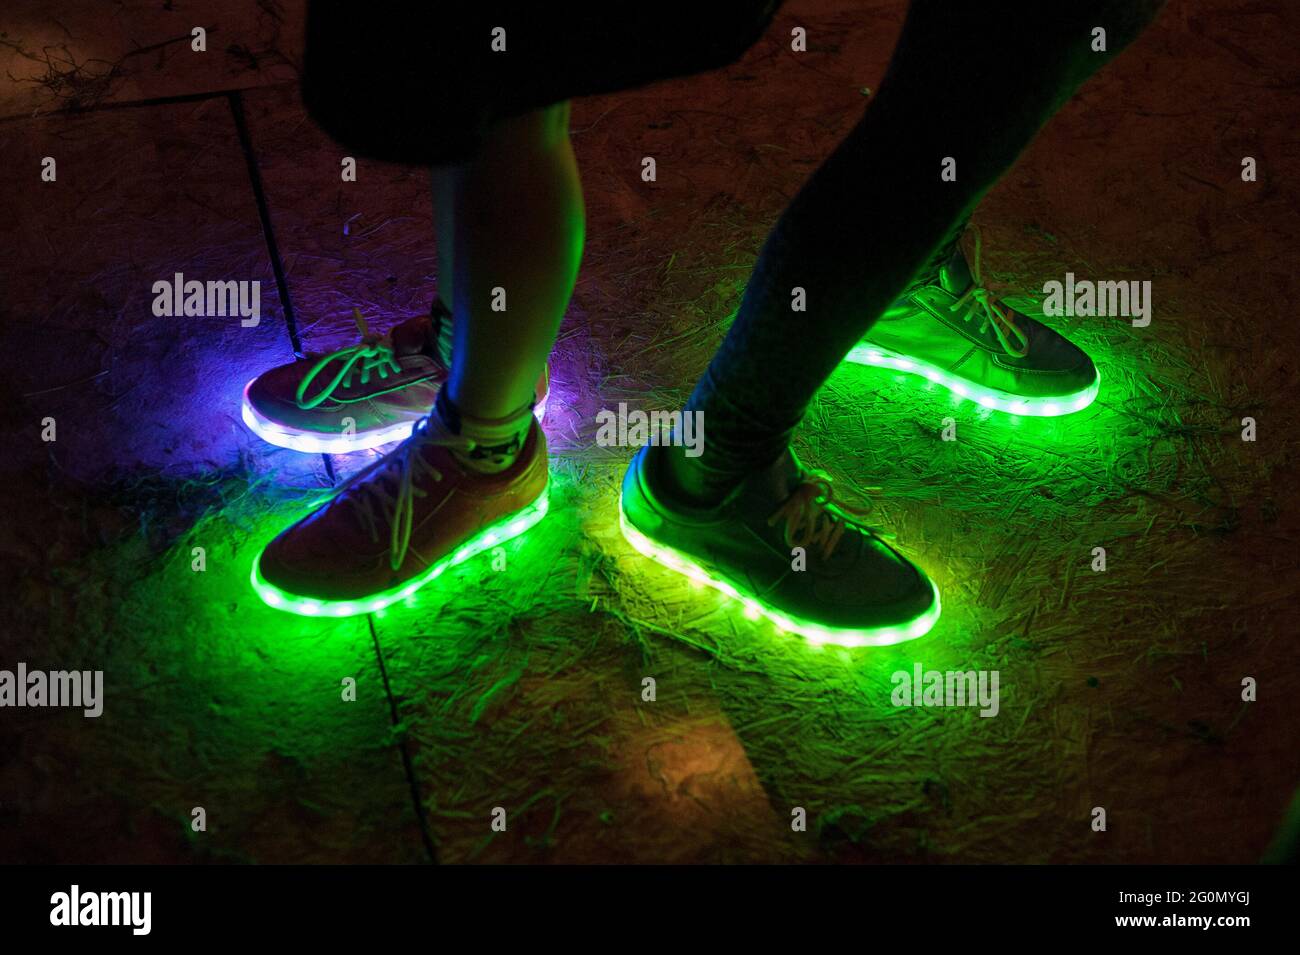 Page 92 | Light Up Shoes Images - Free Download on Freepik